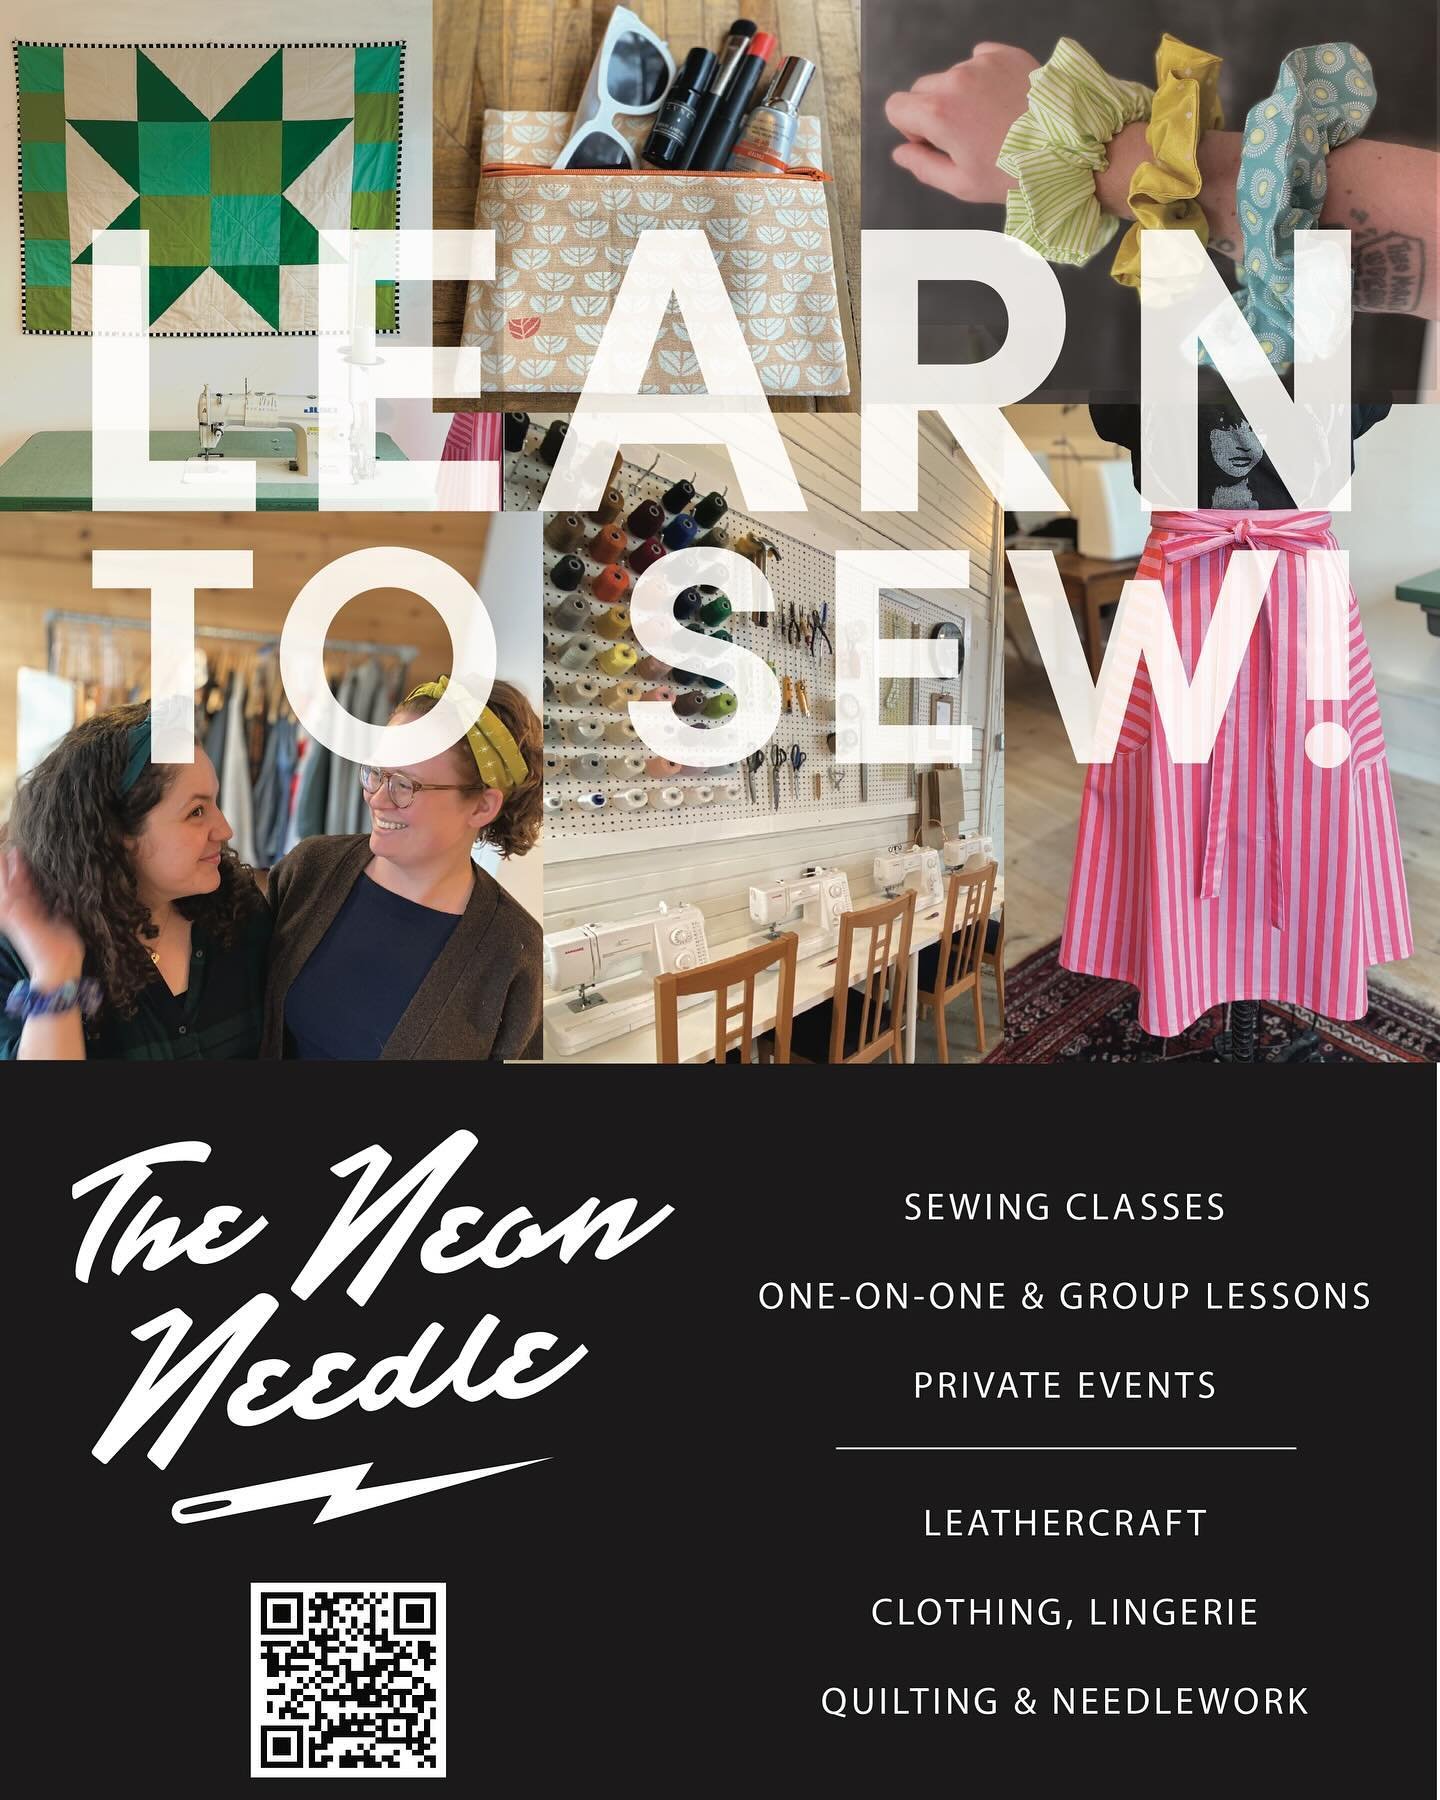 New classes starting every month!

If the dates don&rsquo;t work for you - EMAIL US - let us know what does work.

We believe sewing is magical, empowering and rewarding. Join us! 
It&rsquo;s *sew* much fun to make things!!

#learntosew
#sewfun
#sewr